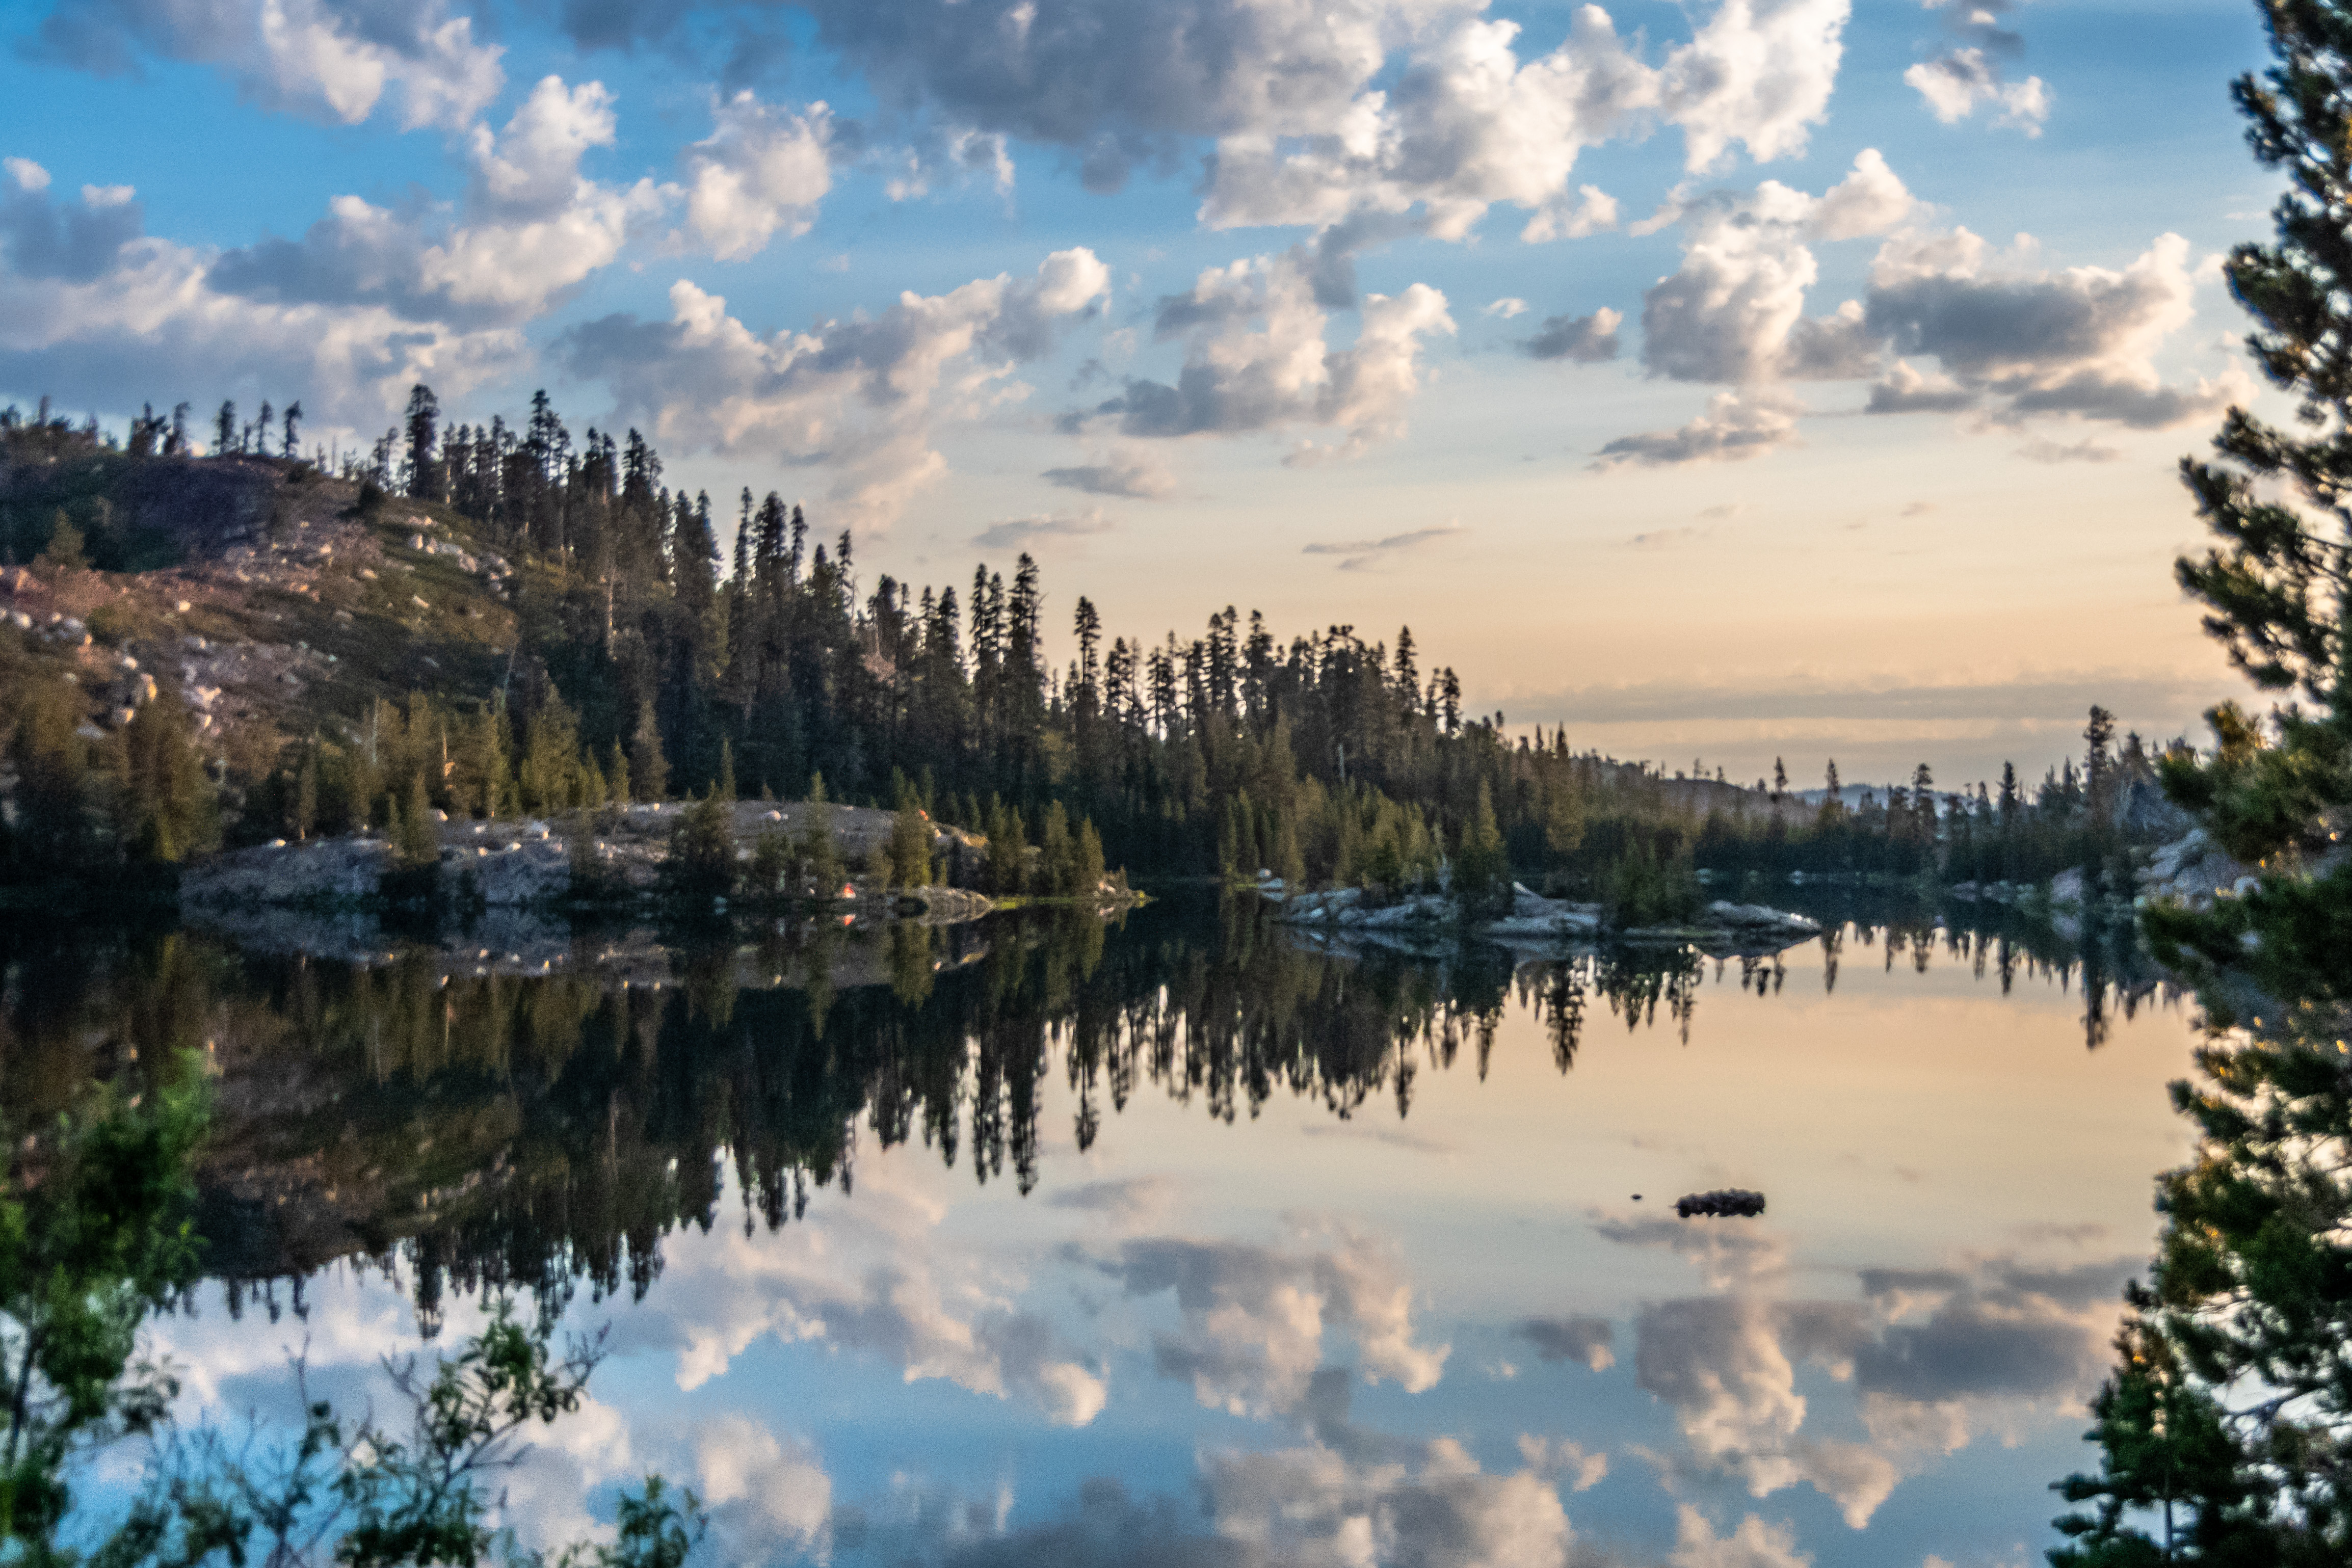 Clouds reflected in alpine lake at sunrise